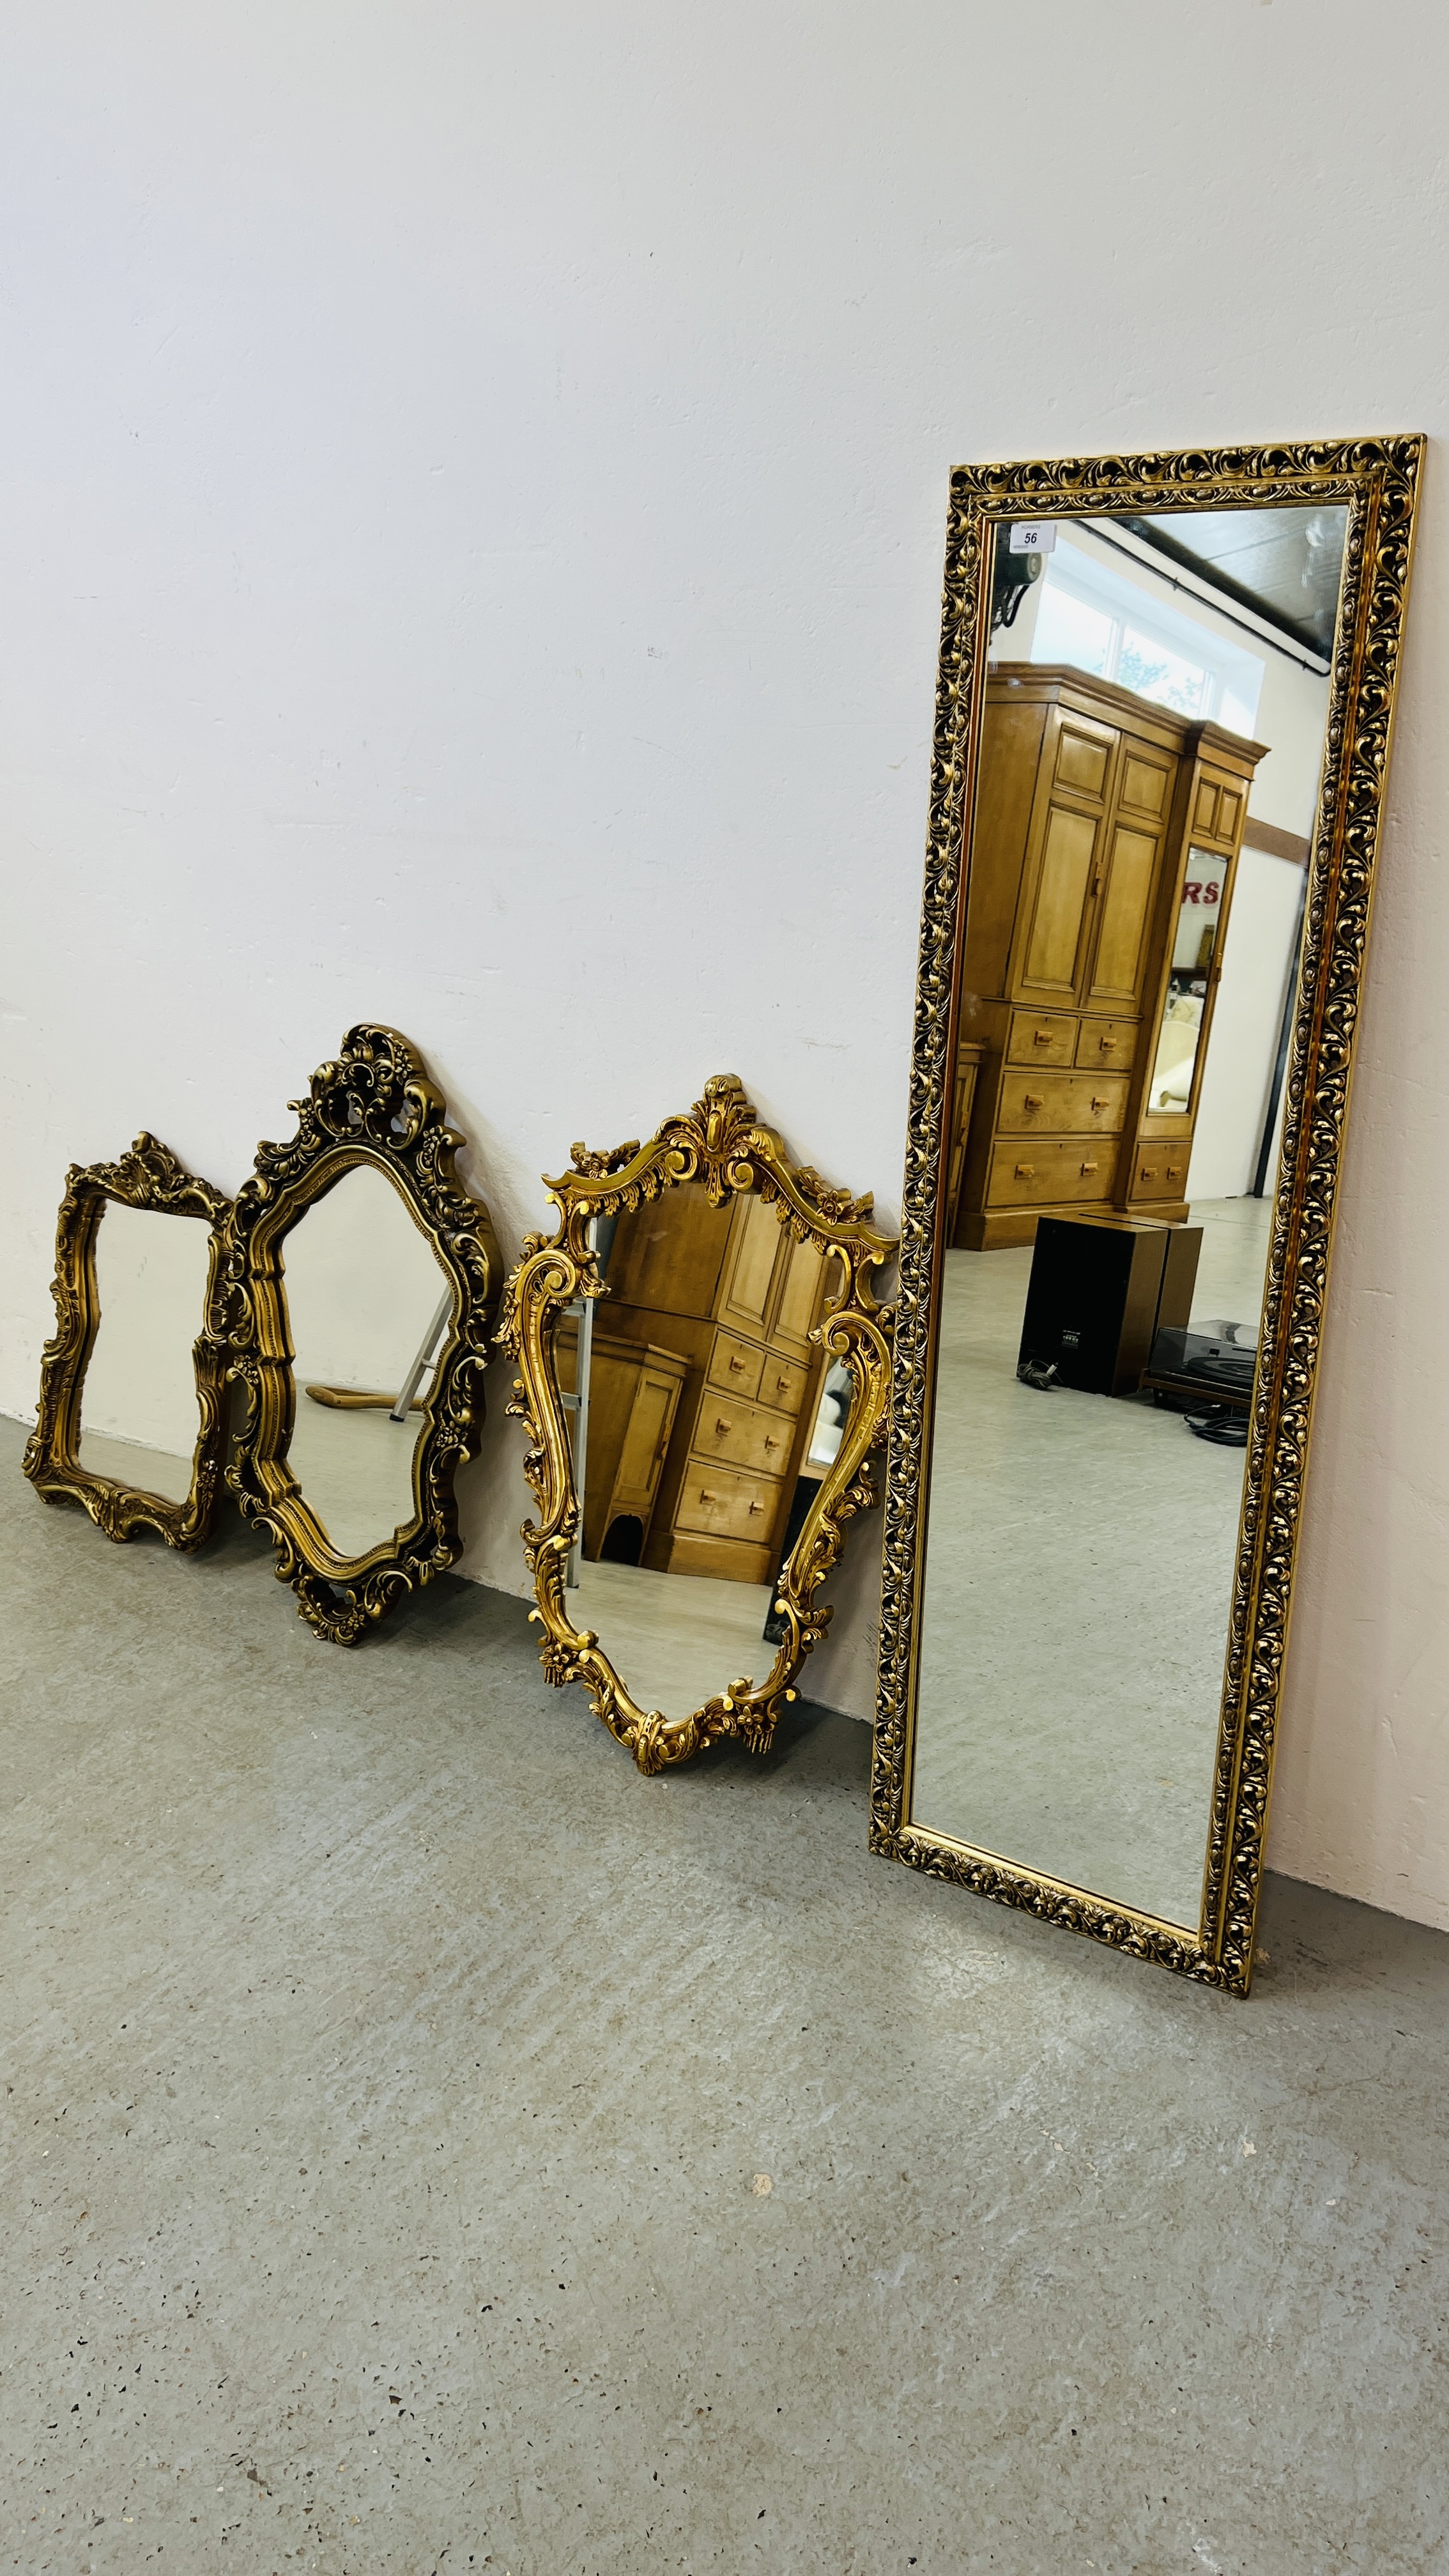 FOUR ORNATE GILT FRAMED DECORATIVE WALL MIRRORS OF VARIOUS DESIGNS